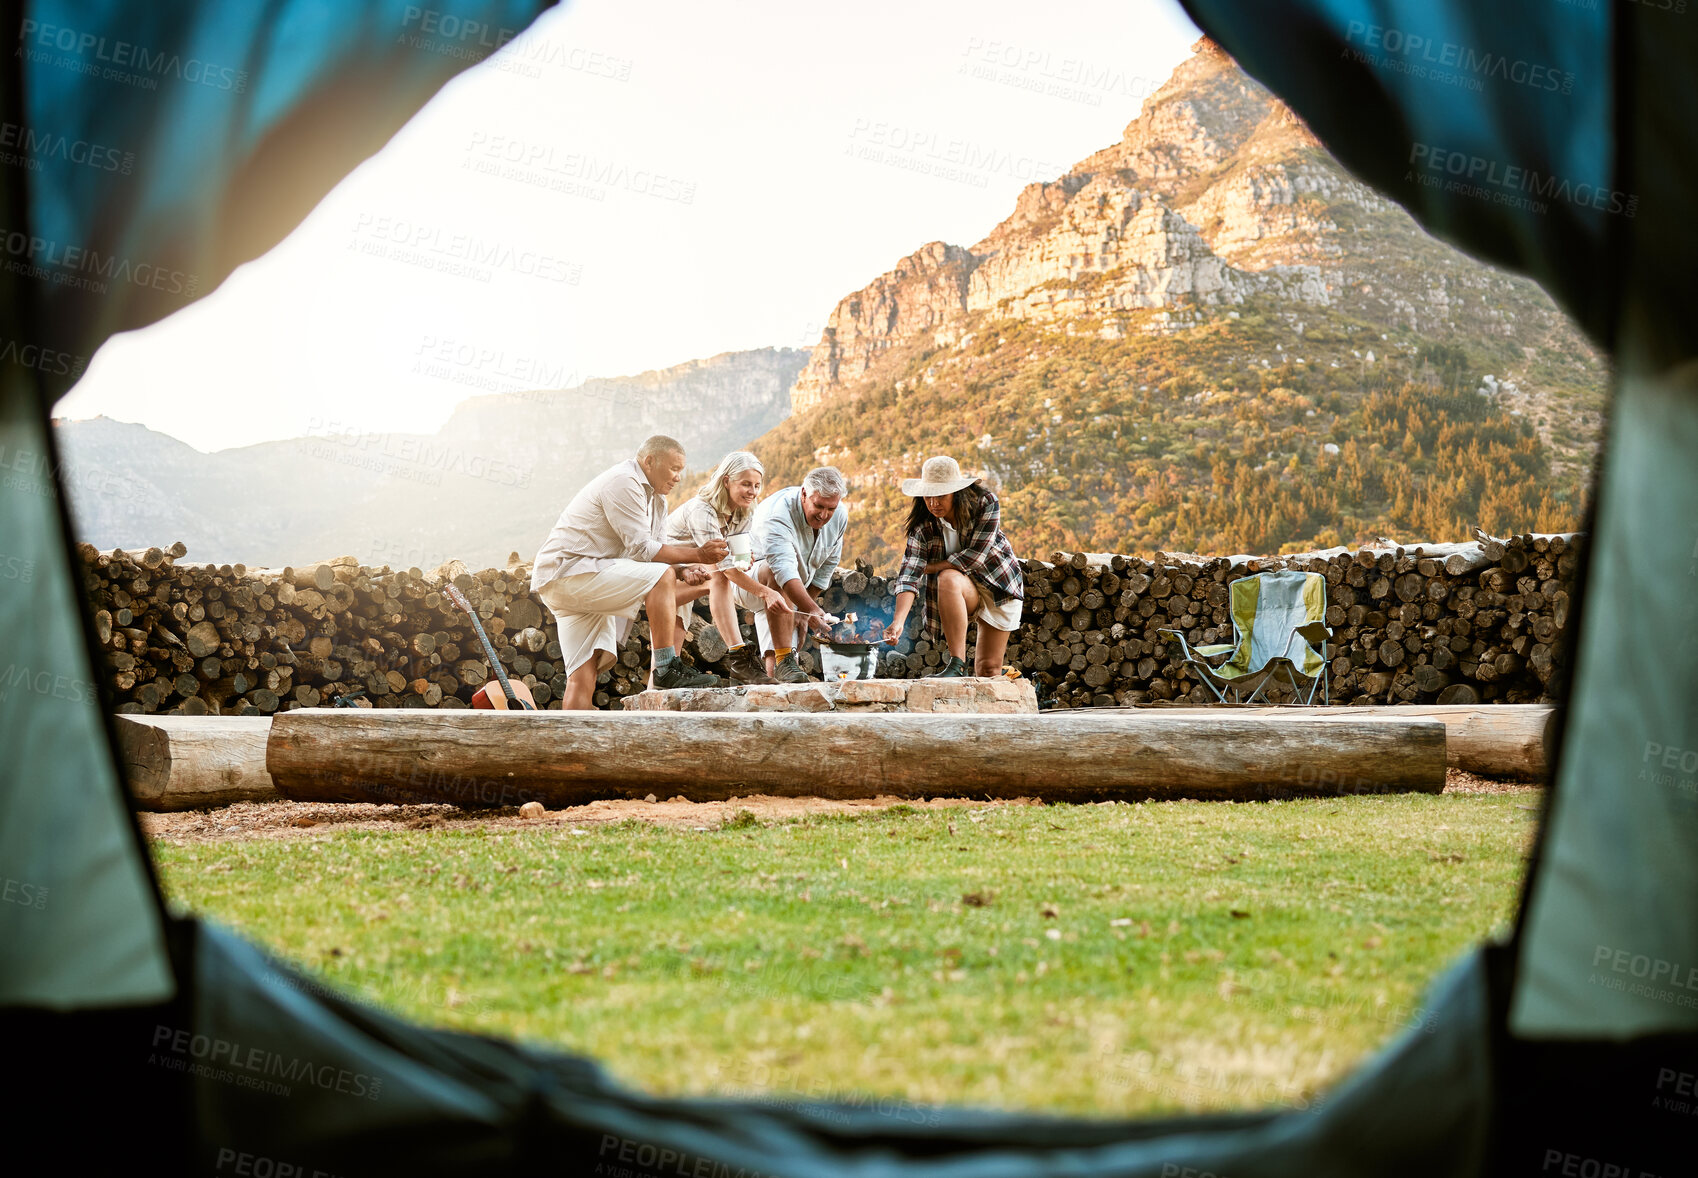 Buy stock photo People camping with a tent and roast marshmallows on a campfire enjoy outdoors, nature and the wild. Fresh air, adventure and travel lifestyle campers on a campsite relax and bond on wellness retreat